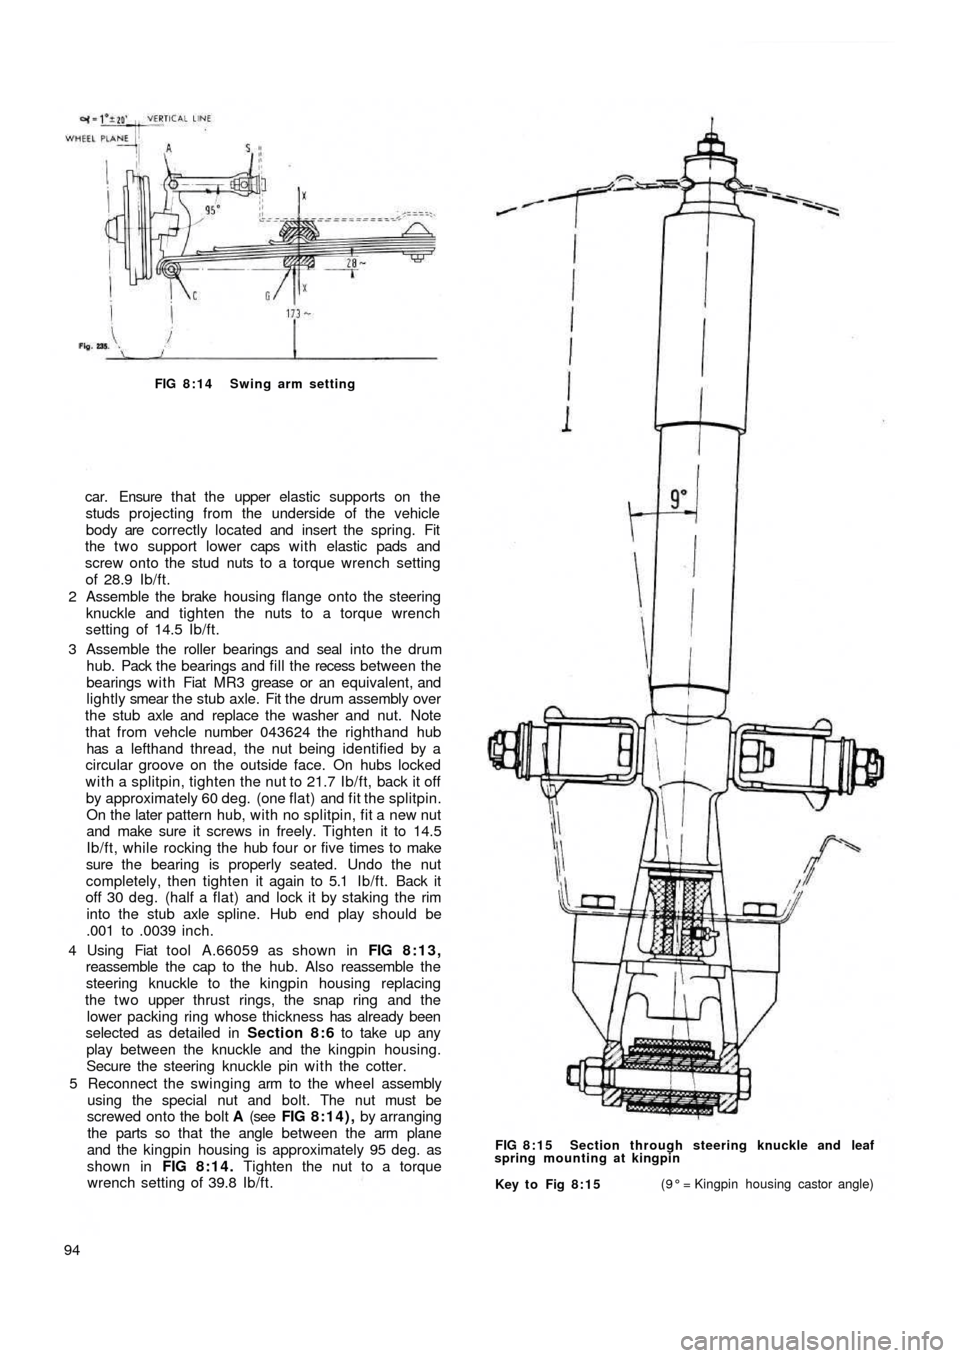 FIAT 500 1957 1.G Workshop Manual FIG 8:14 Swing arm setting
car. Ensure t h a t the  upper elastic supports on the
studs projecting from the underside of the vehicle
body are correctly located and insert the spring. Fit
the two suppo